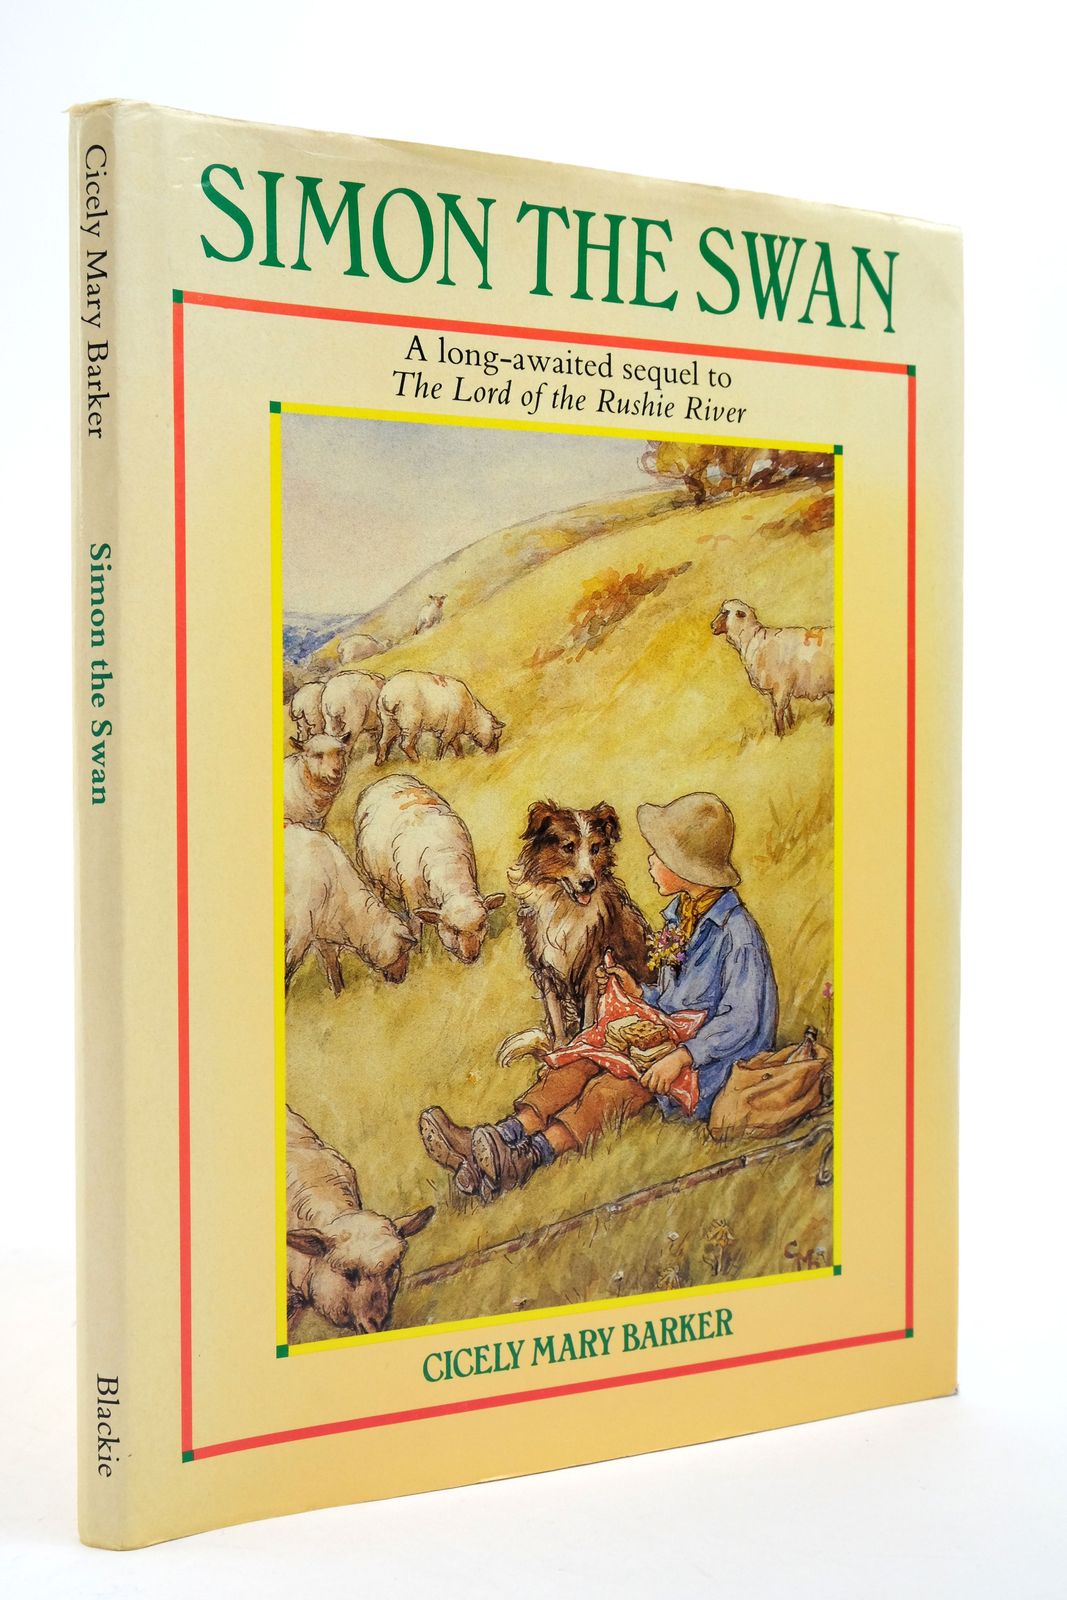 Photo of SIMON THE SWAN written by Barker, Cicely Mary illustrated by Barker, Cicely Mary published by Blackie (STOCK CODE: 2138817)  for sale by Stella & Rose's Books